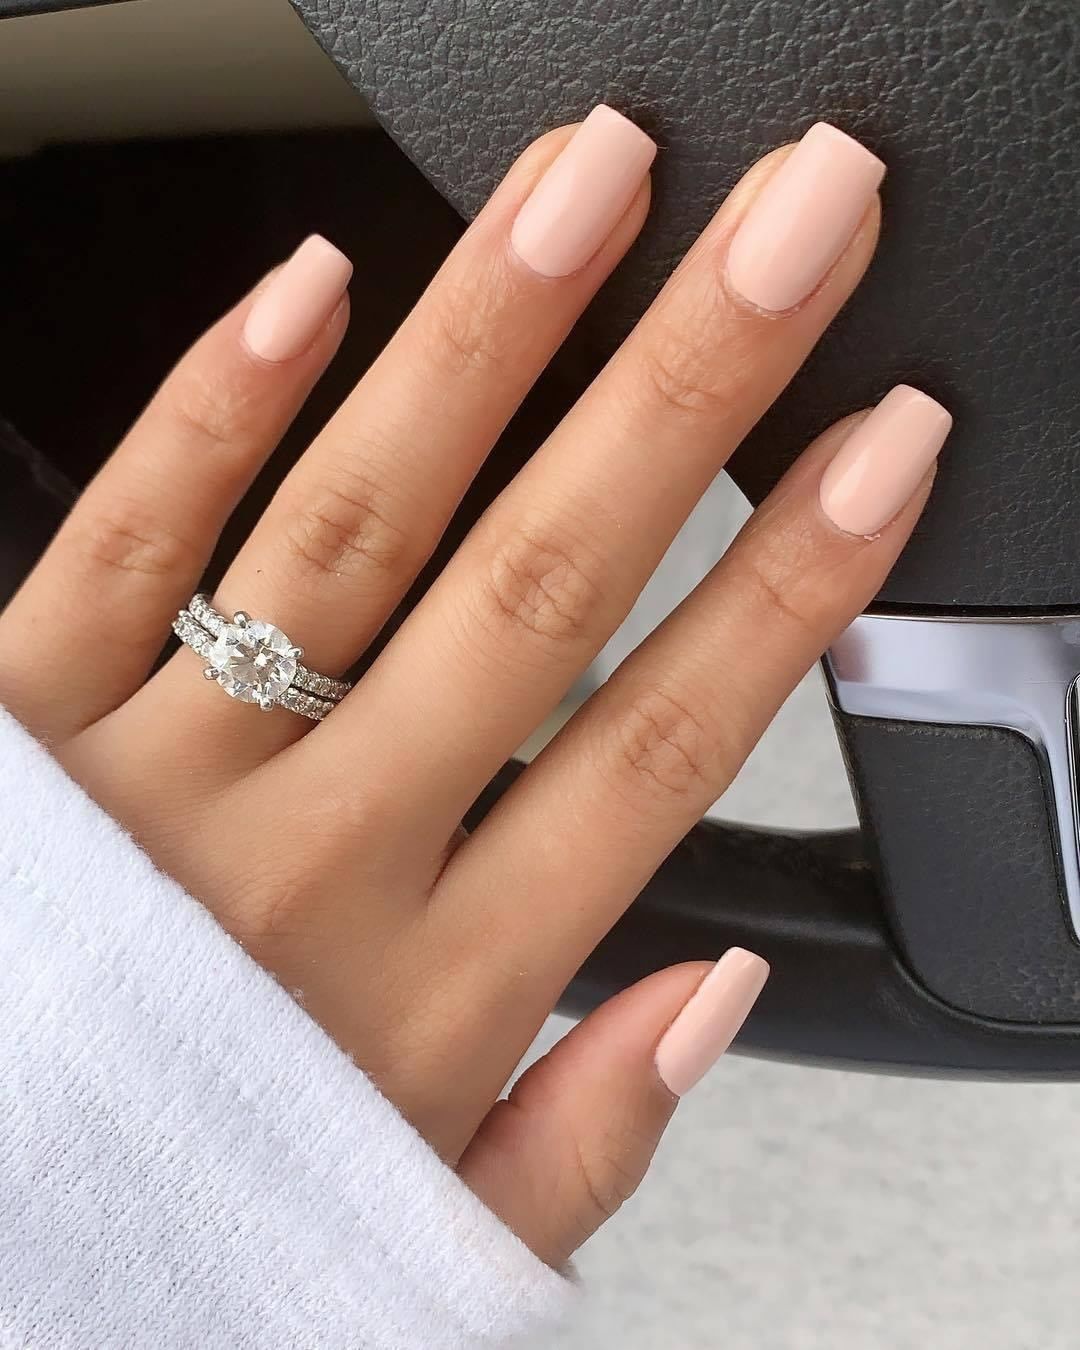 Shop Engagement Rings and Loose Diamonds Online